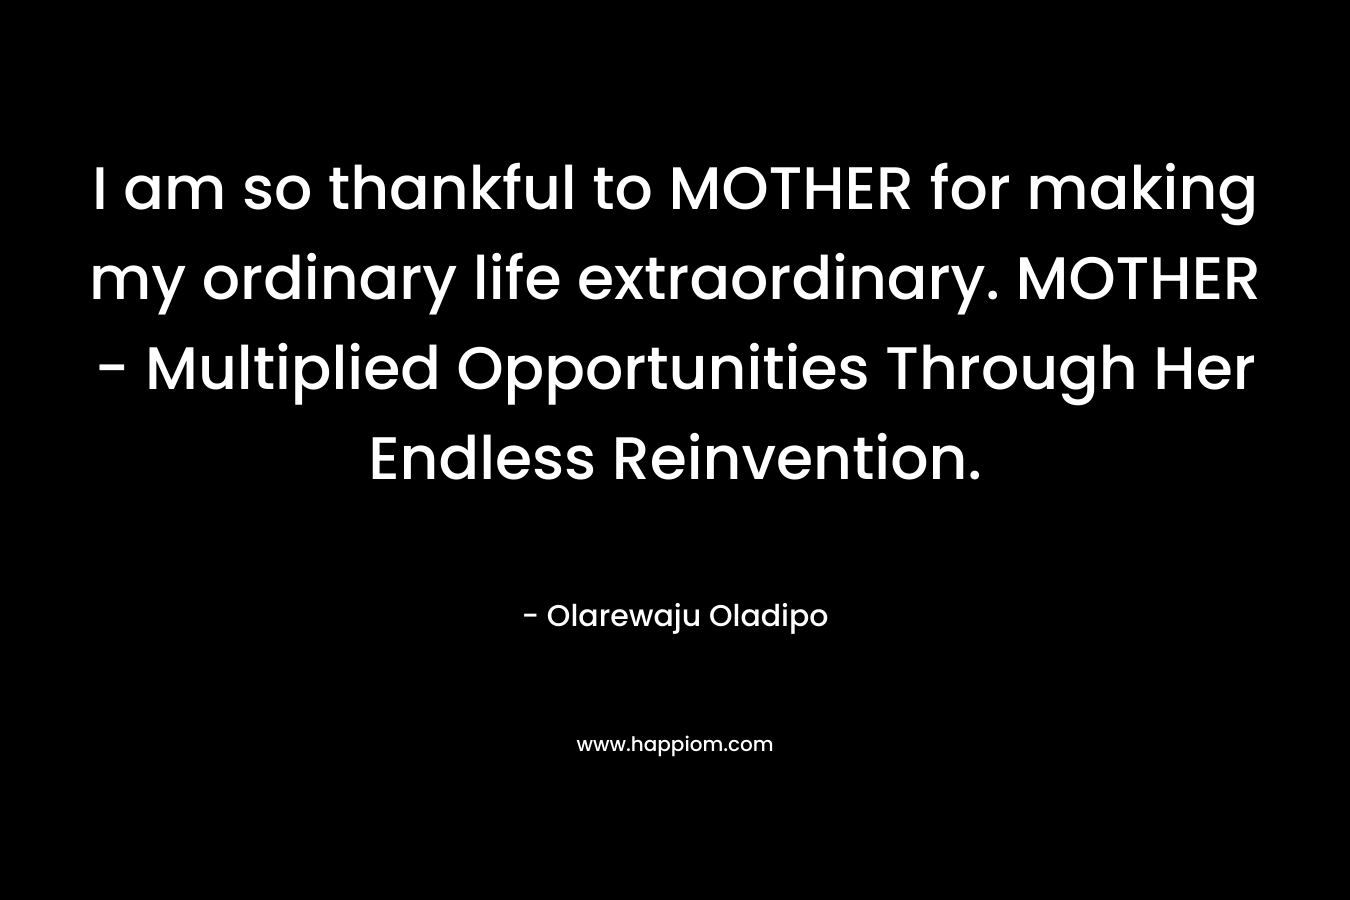 I am so thankful to MOTHER for making my ordinary life extraordinary. MOTHER - Multiplied Opportunities Through Her Endless Reinvention.